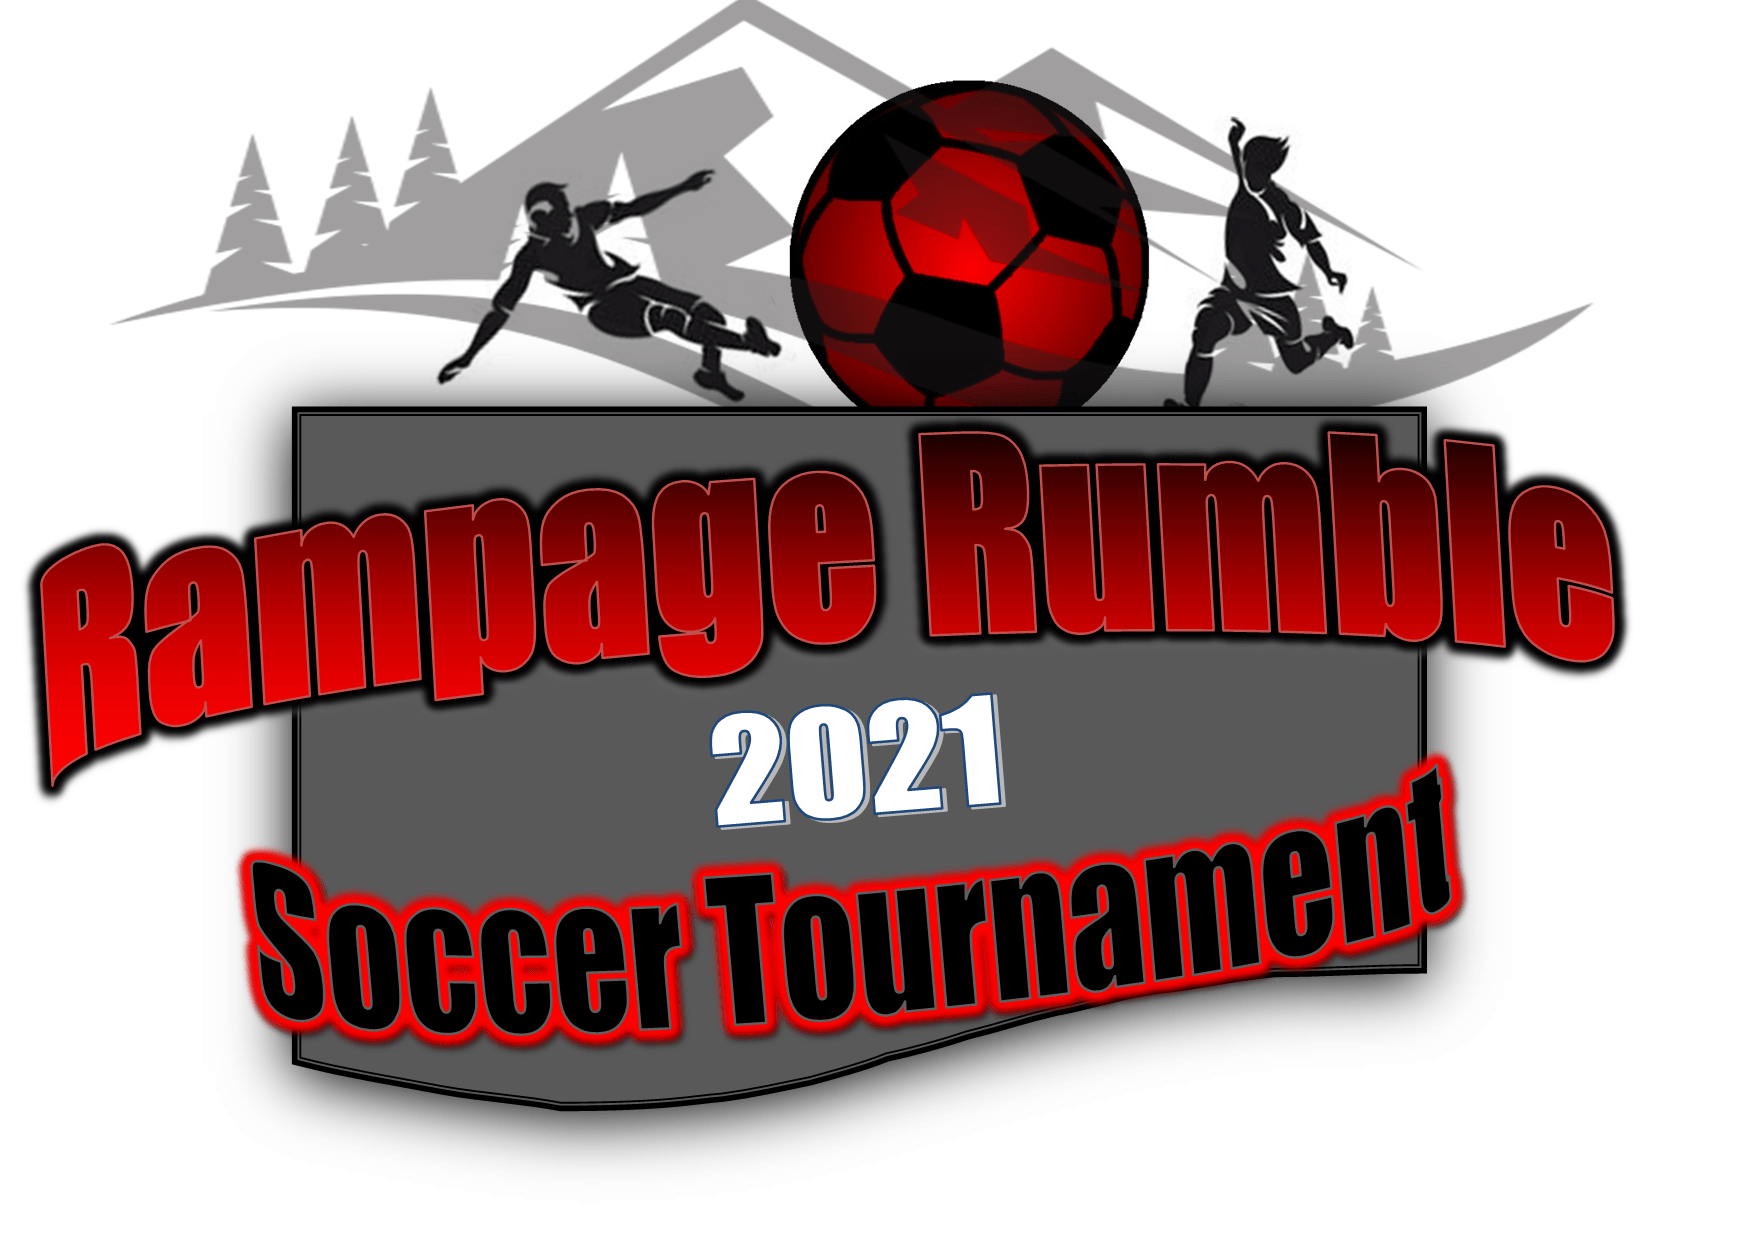 Rampage Rumble 2021 Soccer Tournament